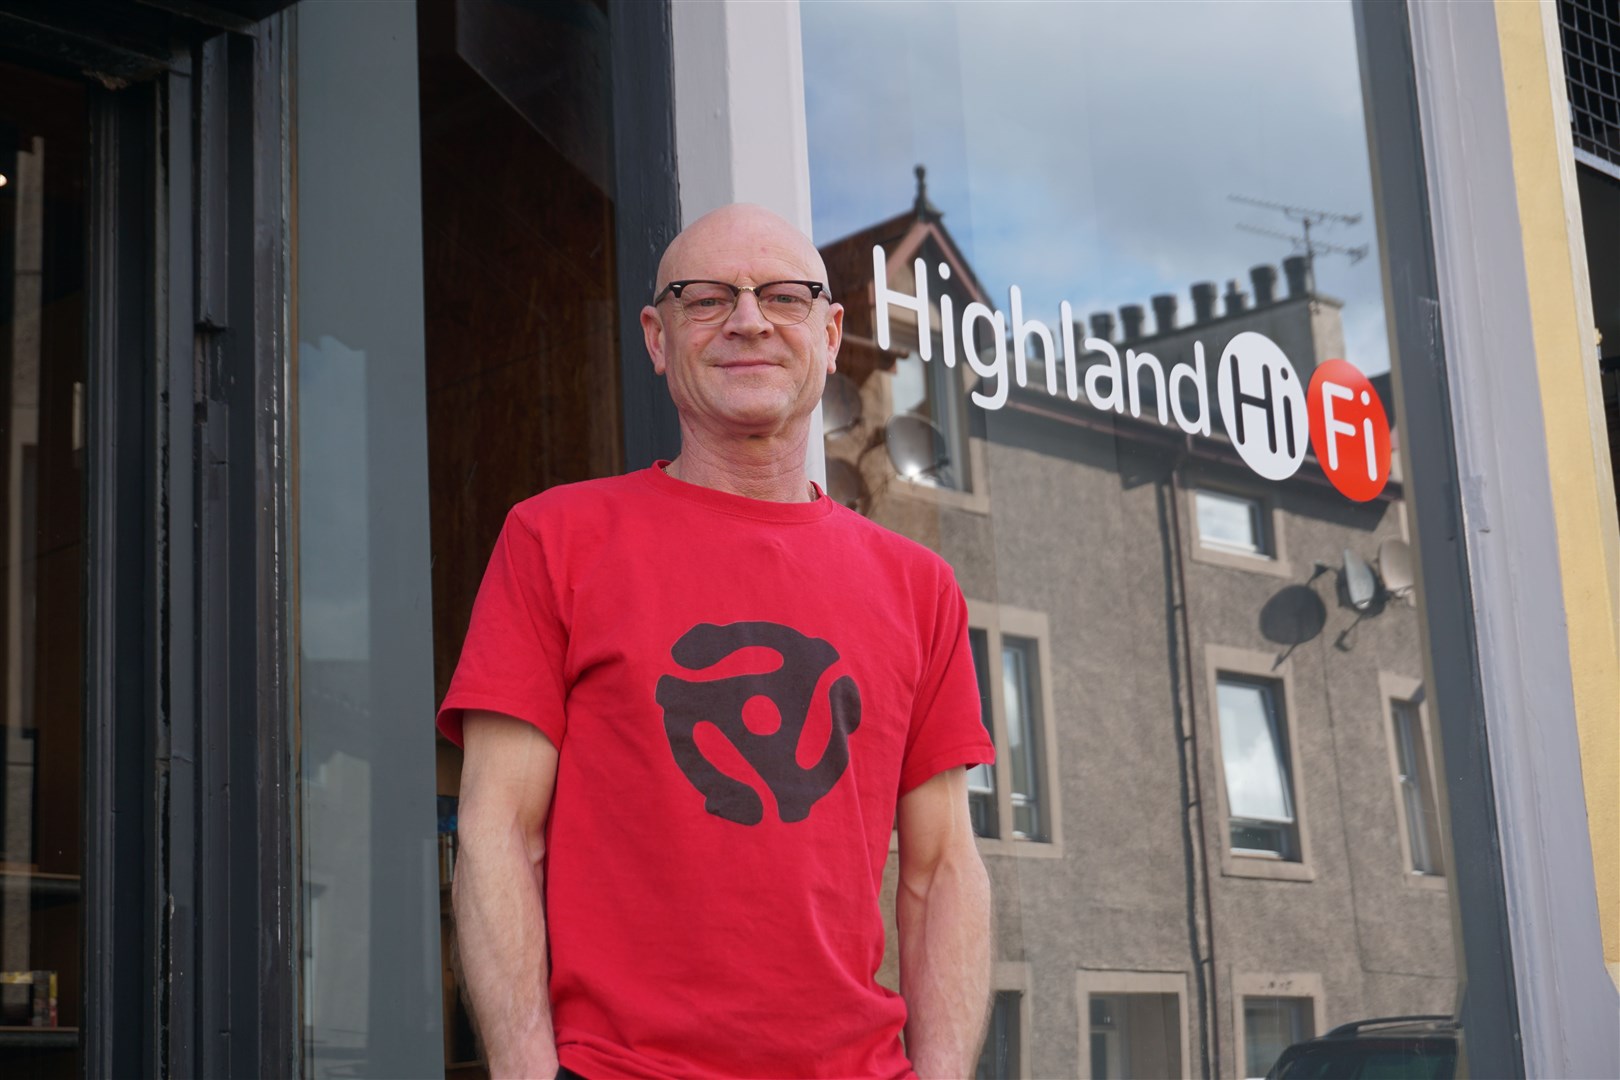 Highland Hi-Fi owner Graeme Dolier (51) on the opening day. The shop is on Greig Street in Inverness. Pictures: Federica Stefani.